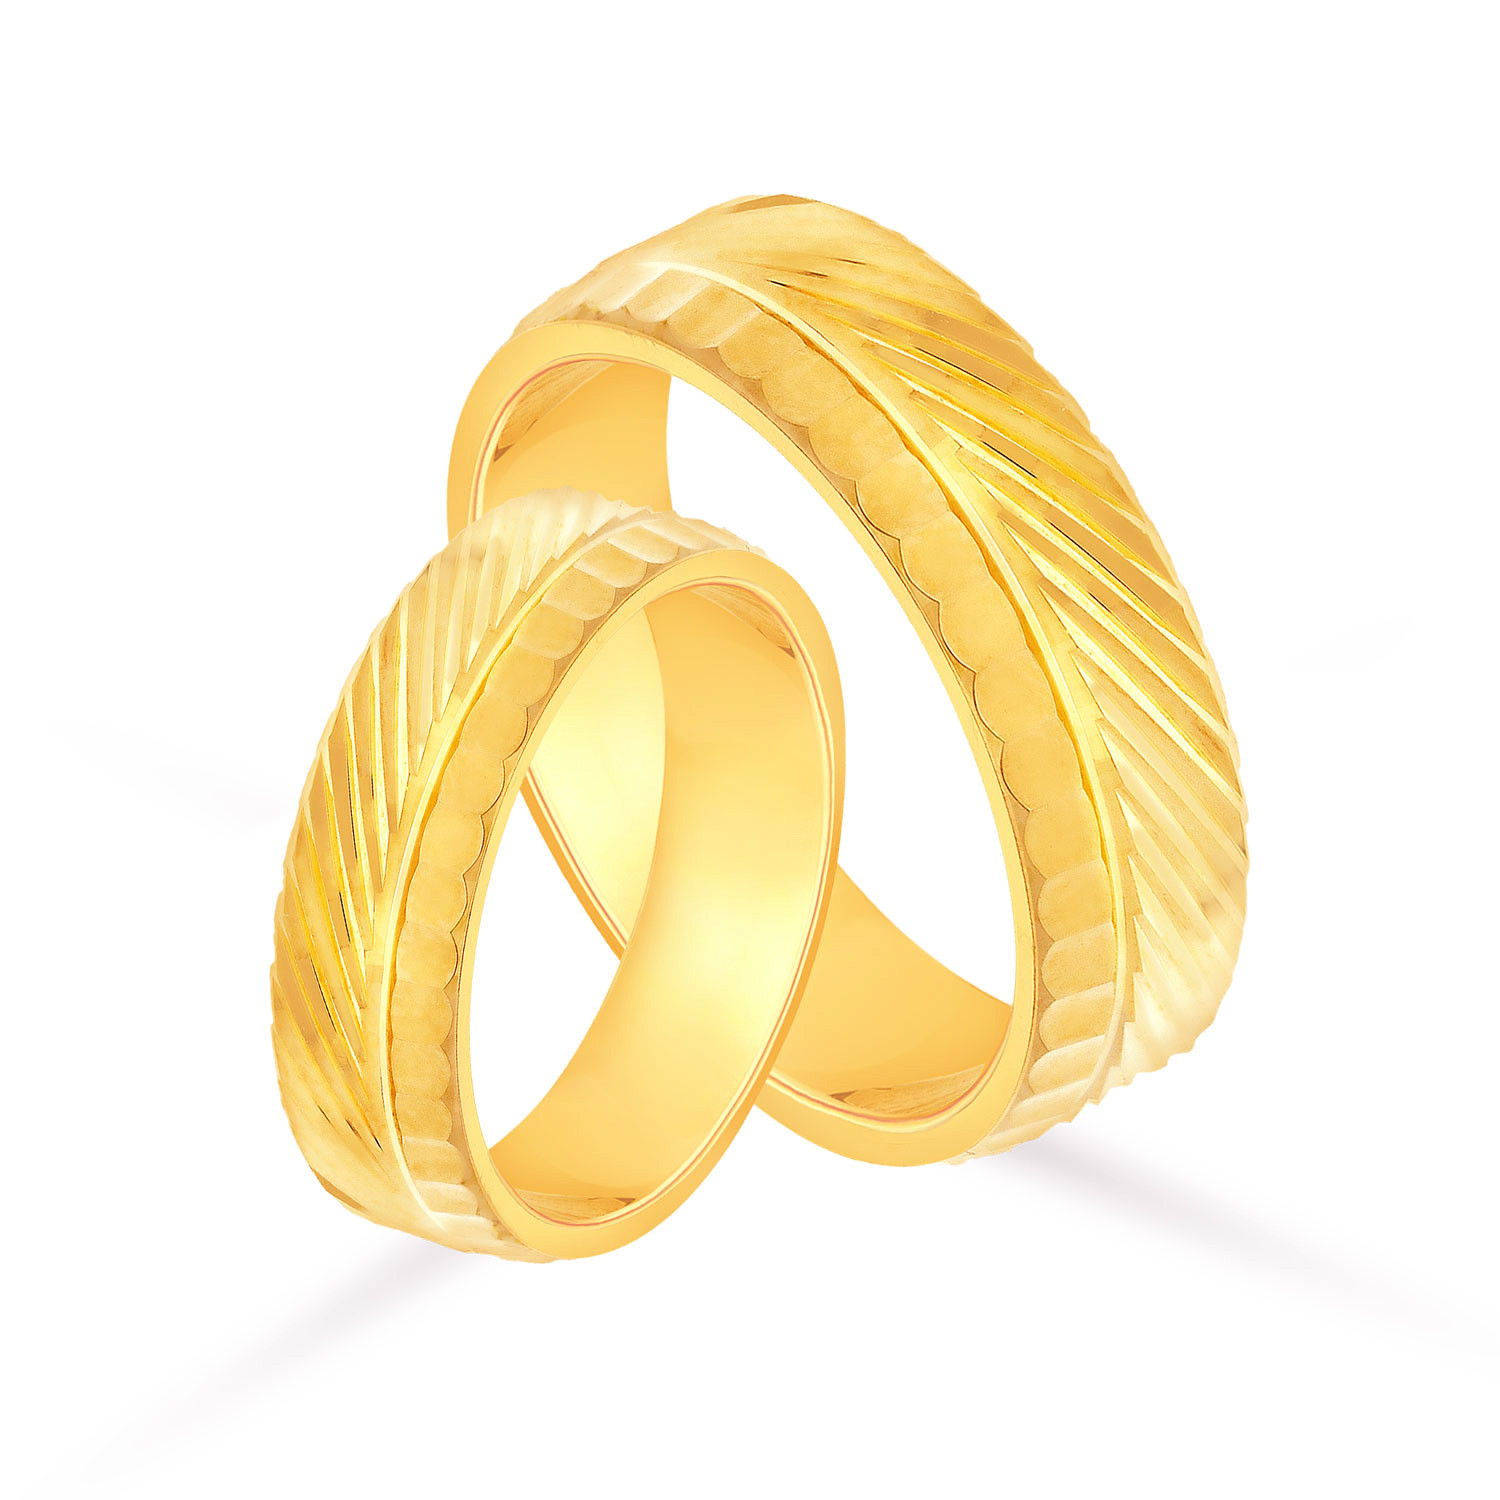 Buy MALABAR GOLD AND DIAMONDS Mens 22KT Gold Ring- Size 20 | Shoppers Stop